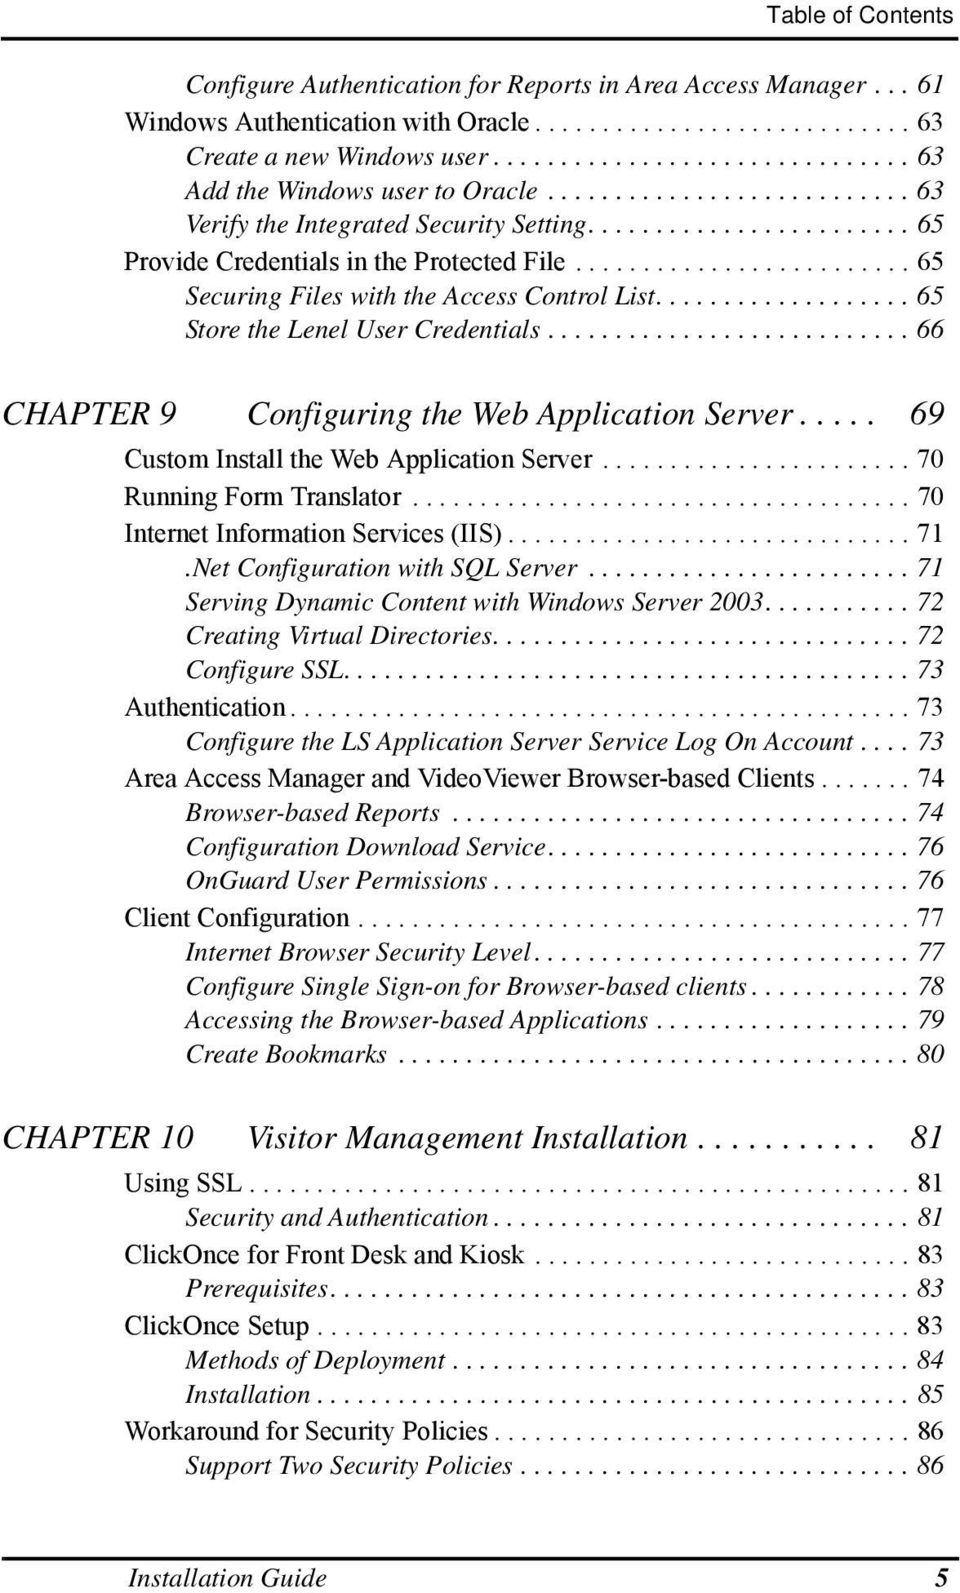 ........................ 65 Securing Files with the Access Control List................... 65 Store the Lenel User Credentials........................... 66 CHAPTER 9 Configuring the Web Application Server.